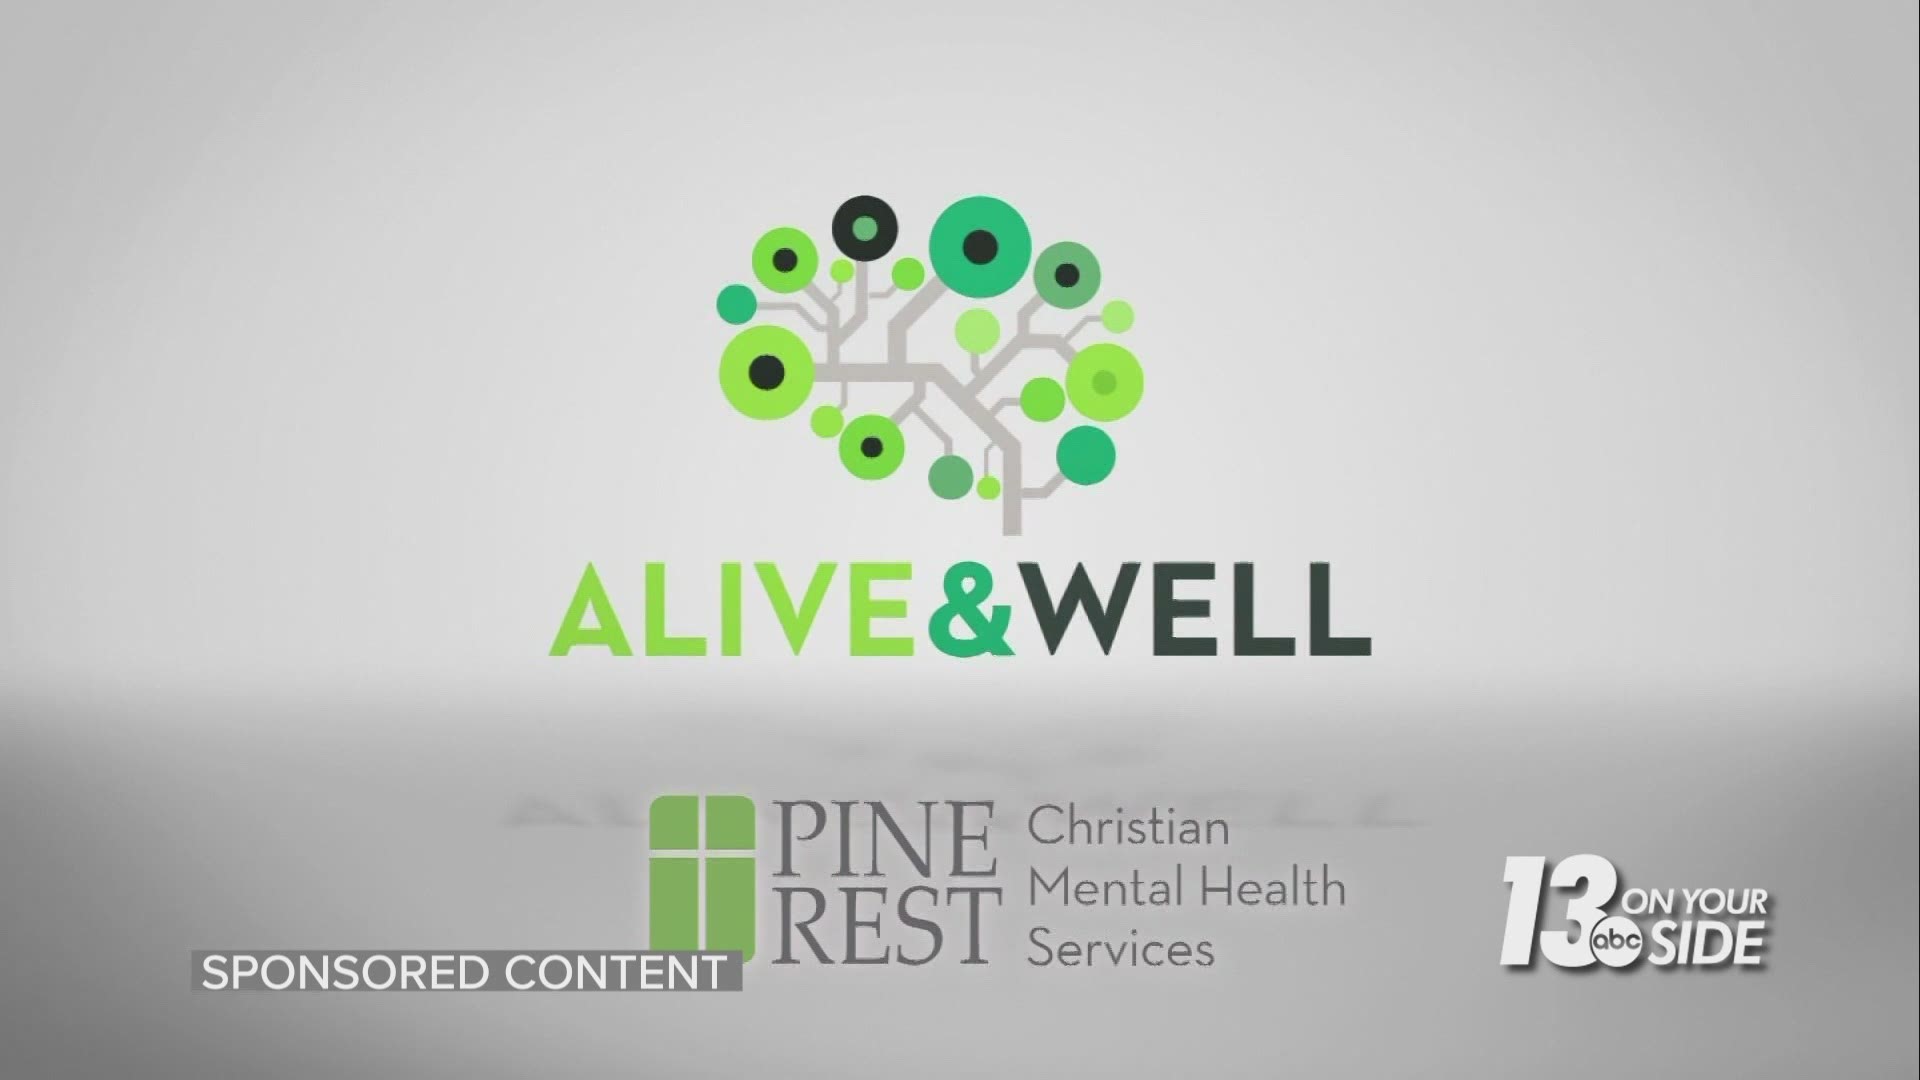 This summer, Pine Rest launched a new program to provide a higher level of support after patients leave the hospital.